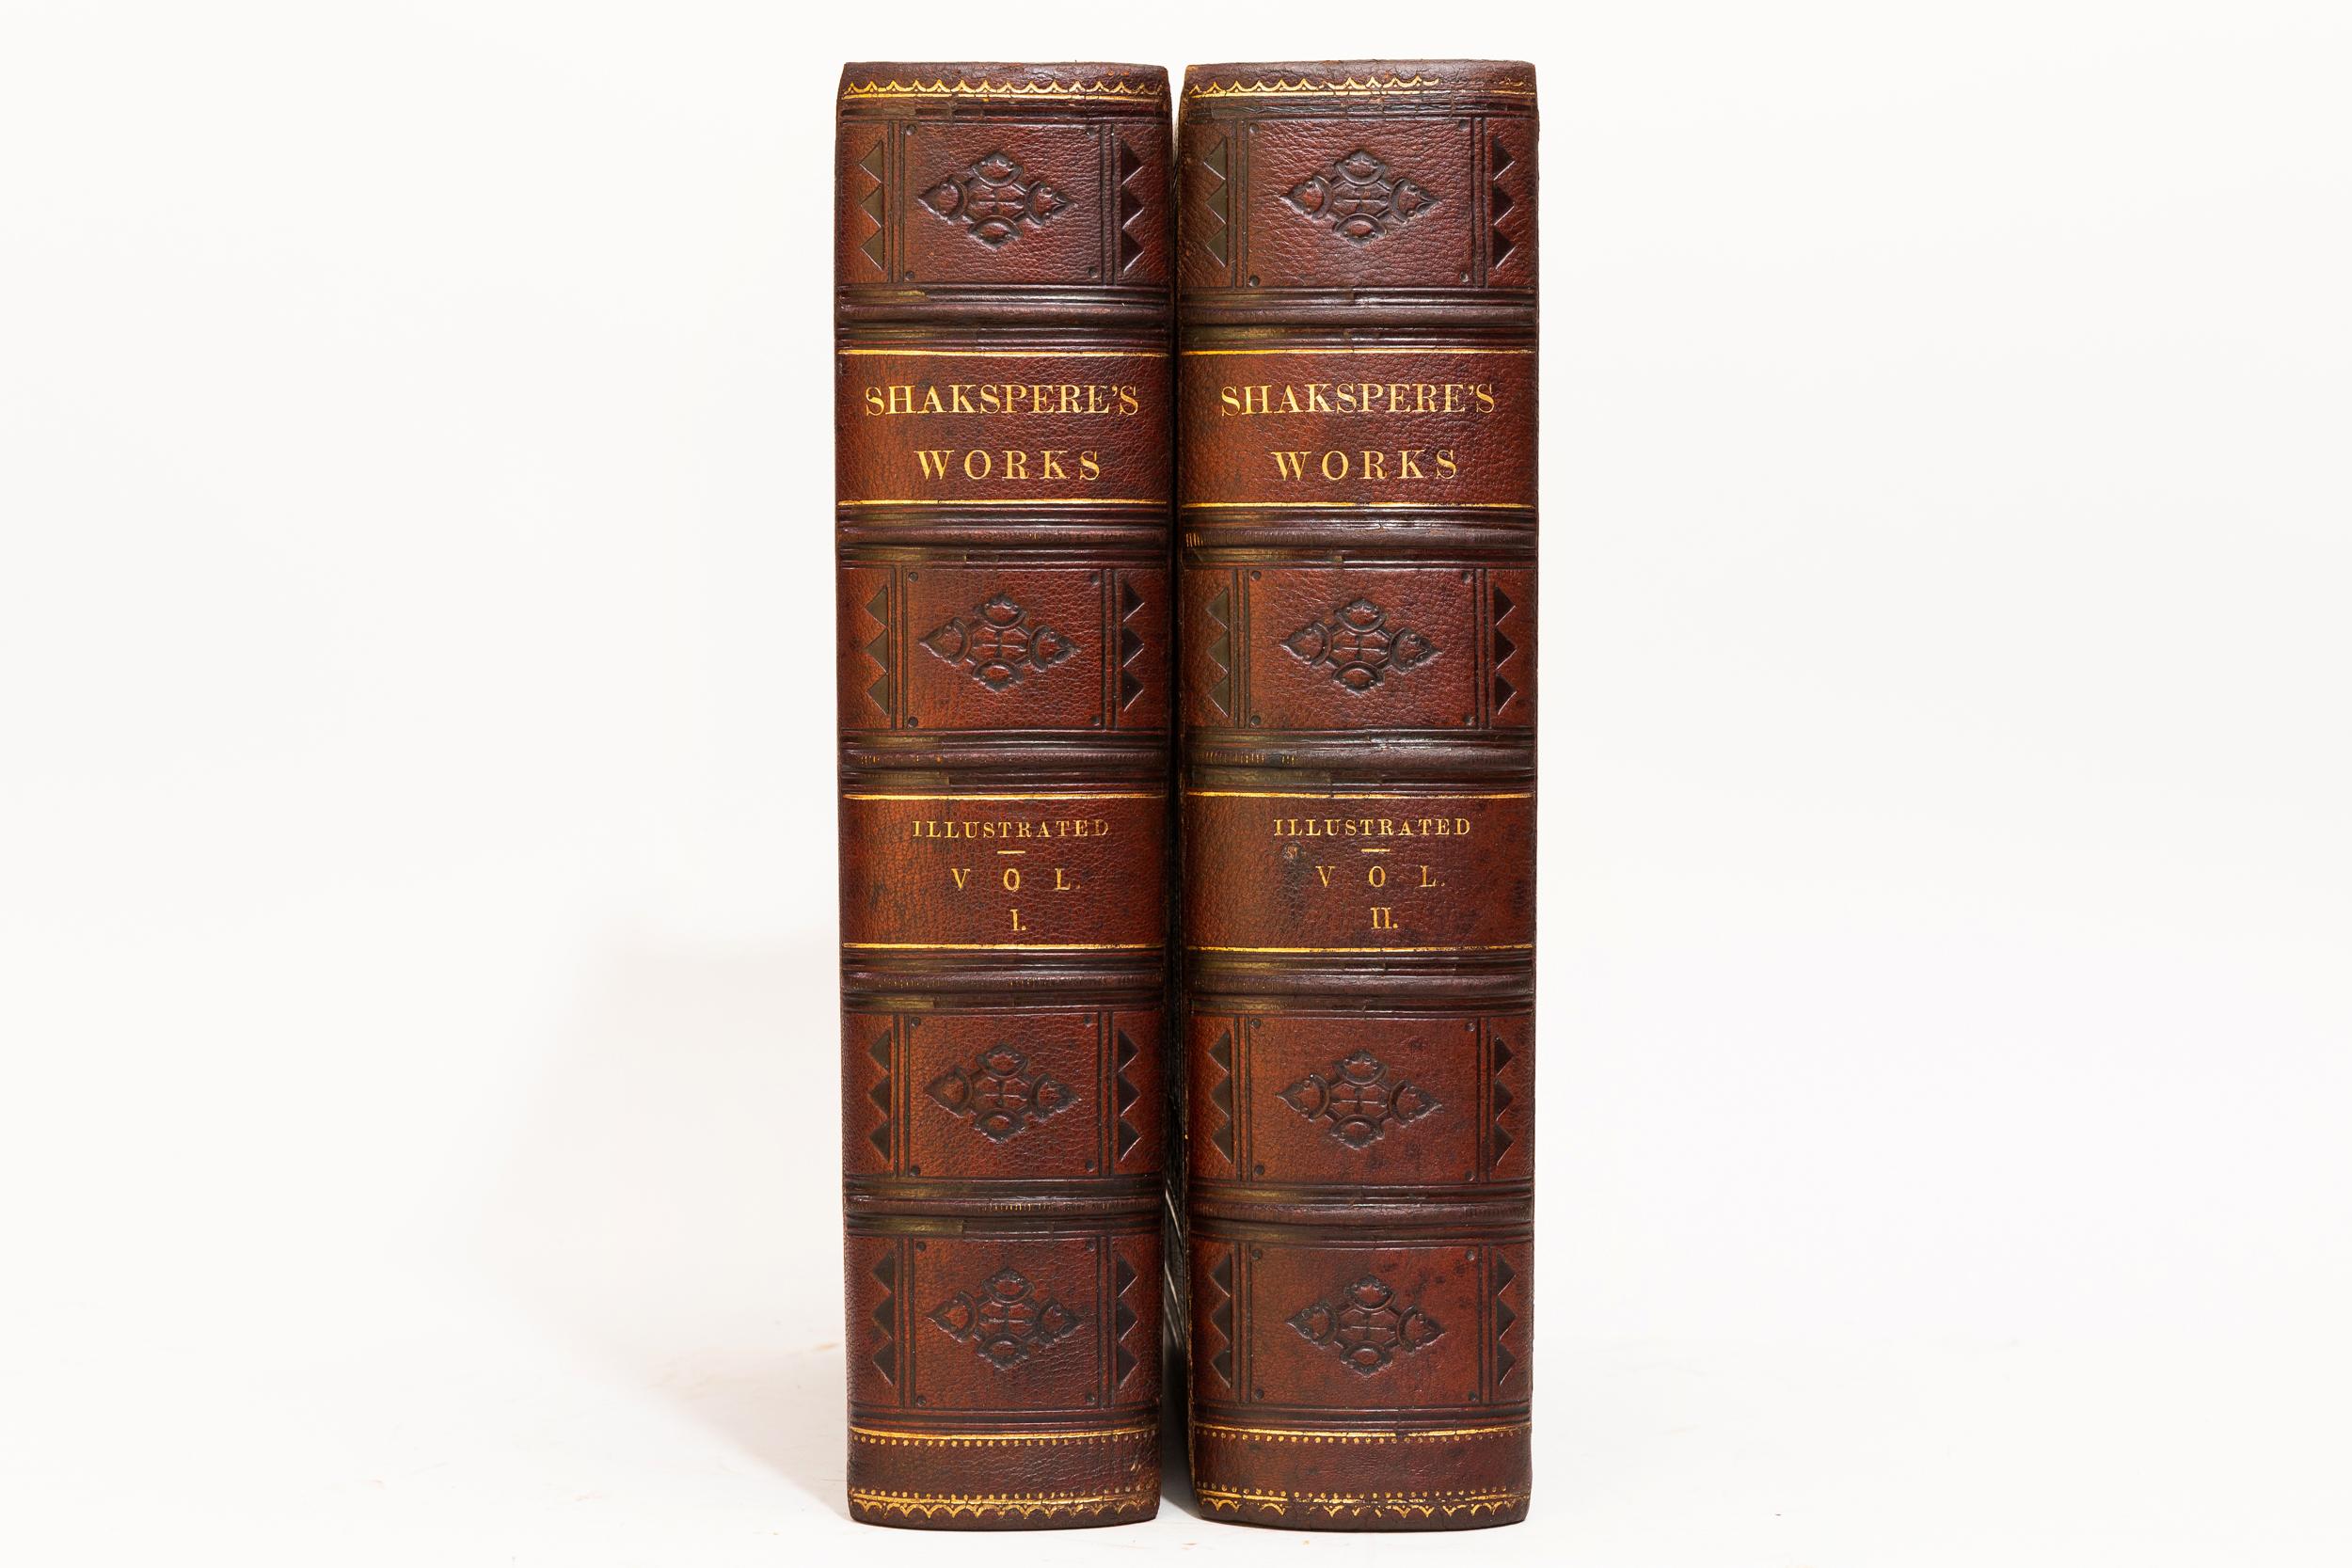 2 Volumes. William Shakespeare, The Works of Shakespeare. Bound in full brown morocco. Decorative blind tooling on covers. Decorative gilt emblem of Shakespeare on covers. Raised bands. Decorative blind tooling on spines. All edges gilt. Silk